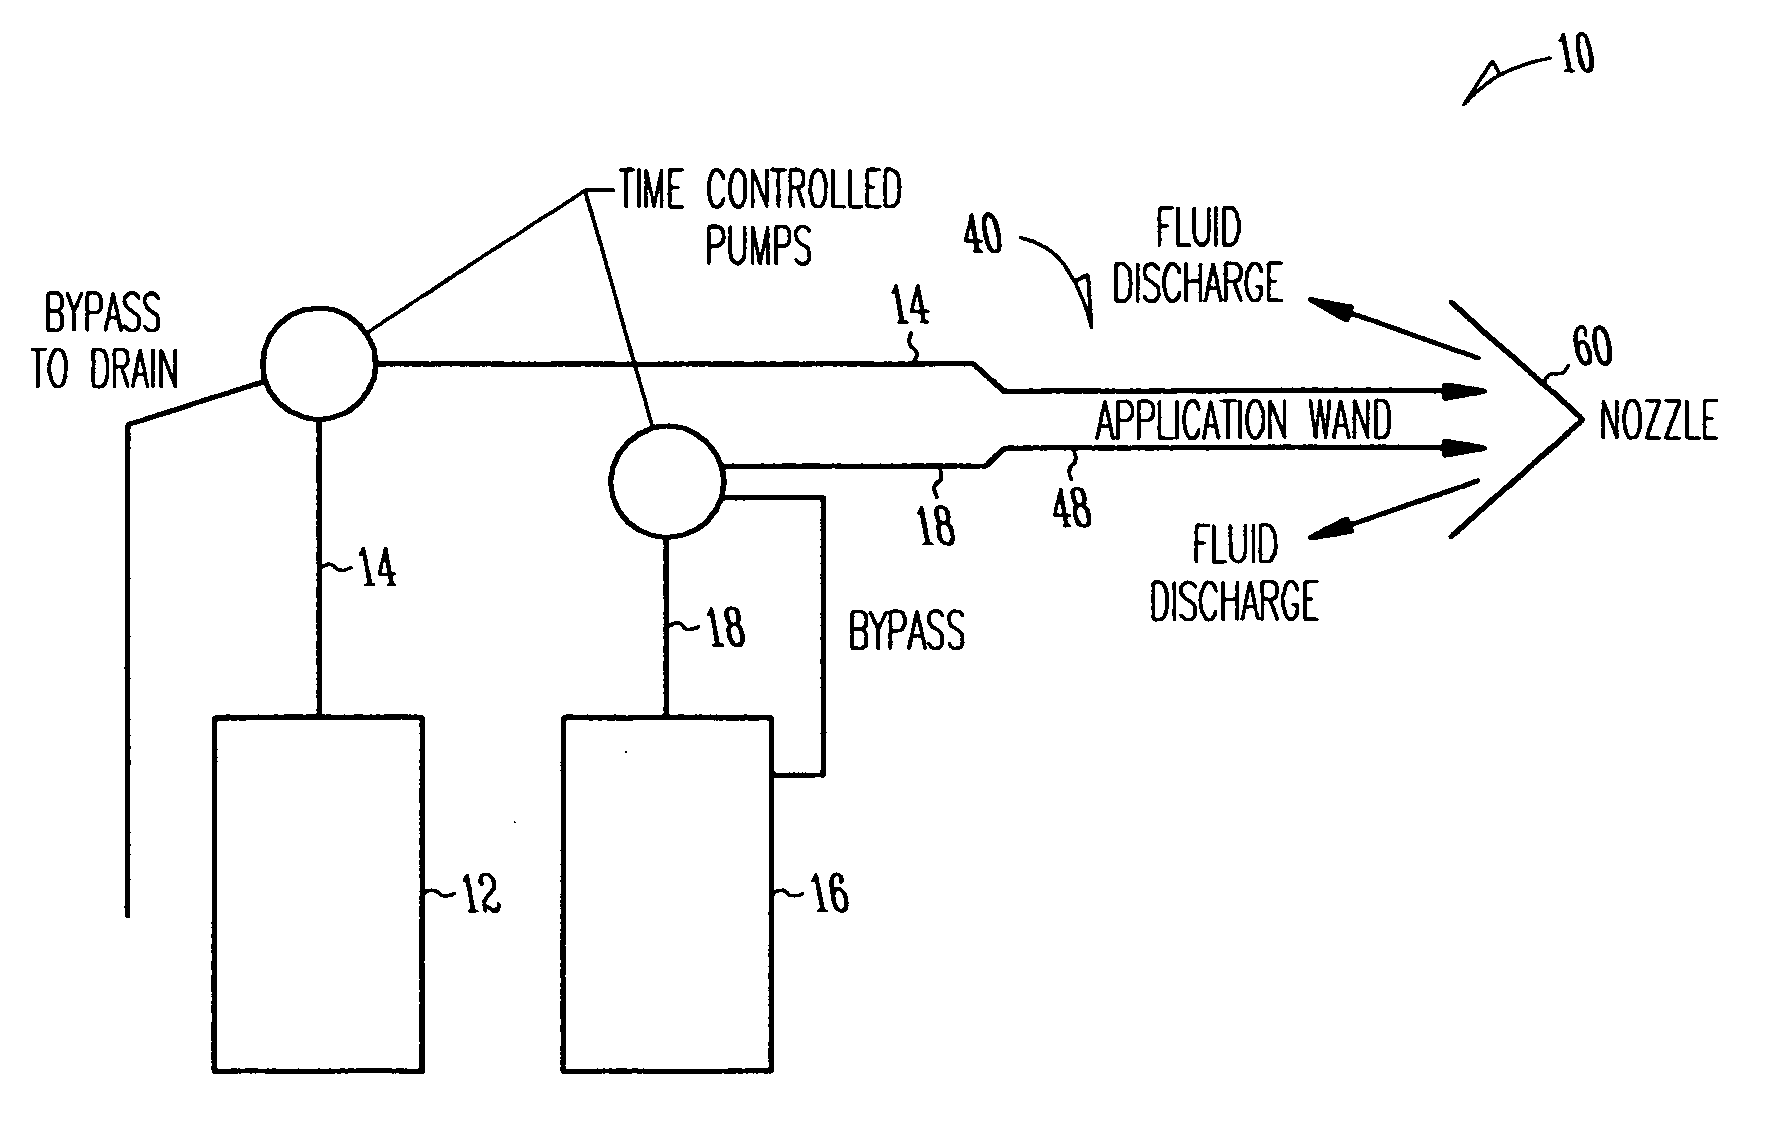 Animal cleaning system and method